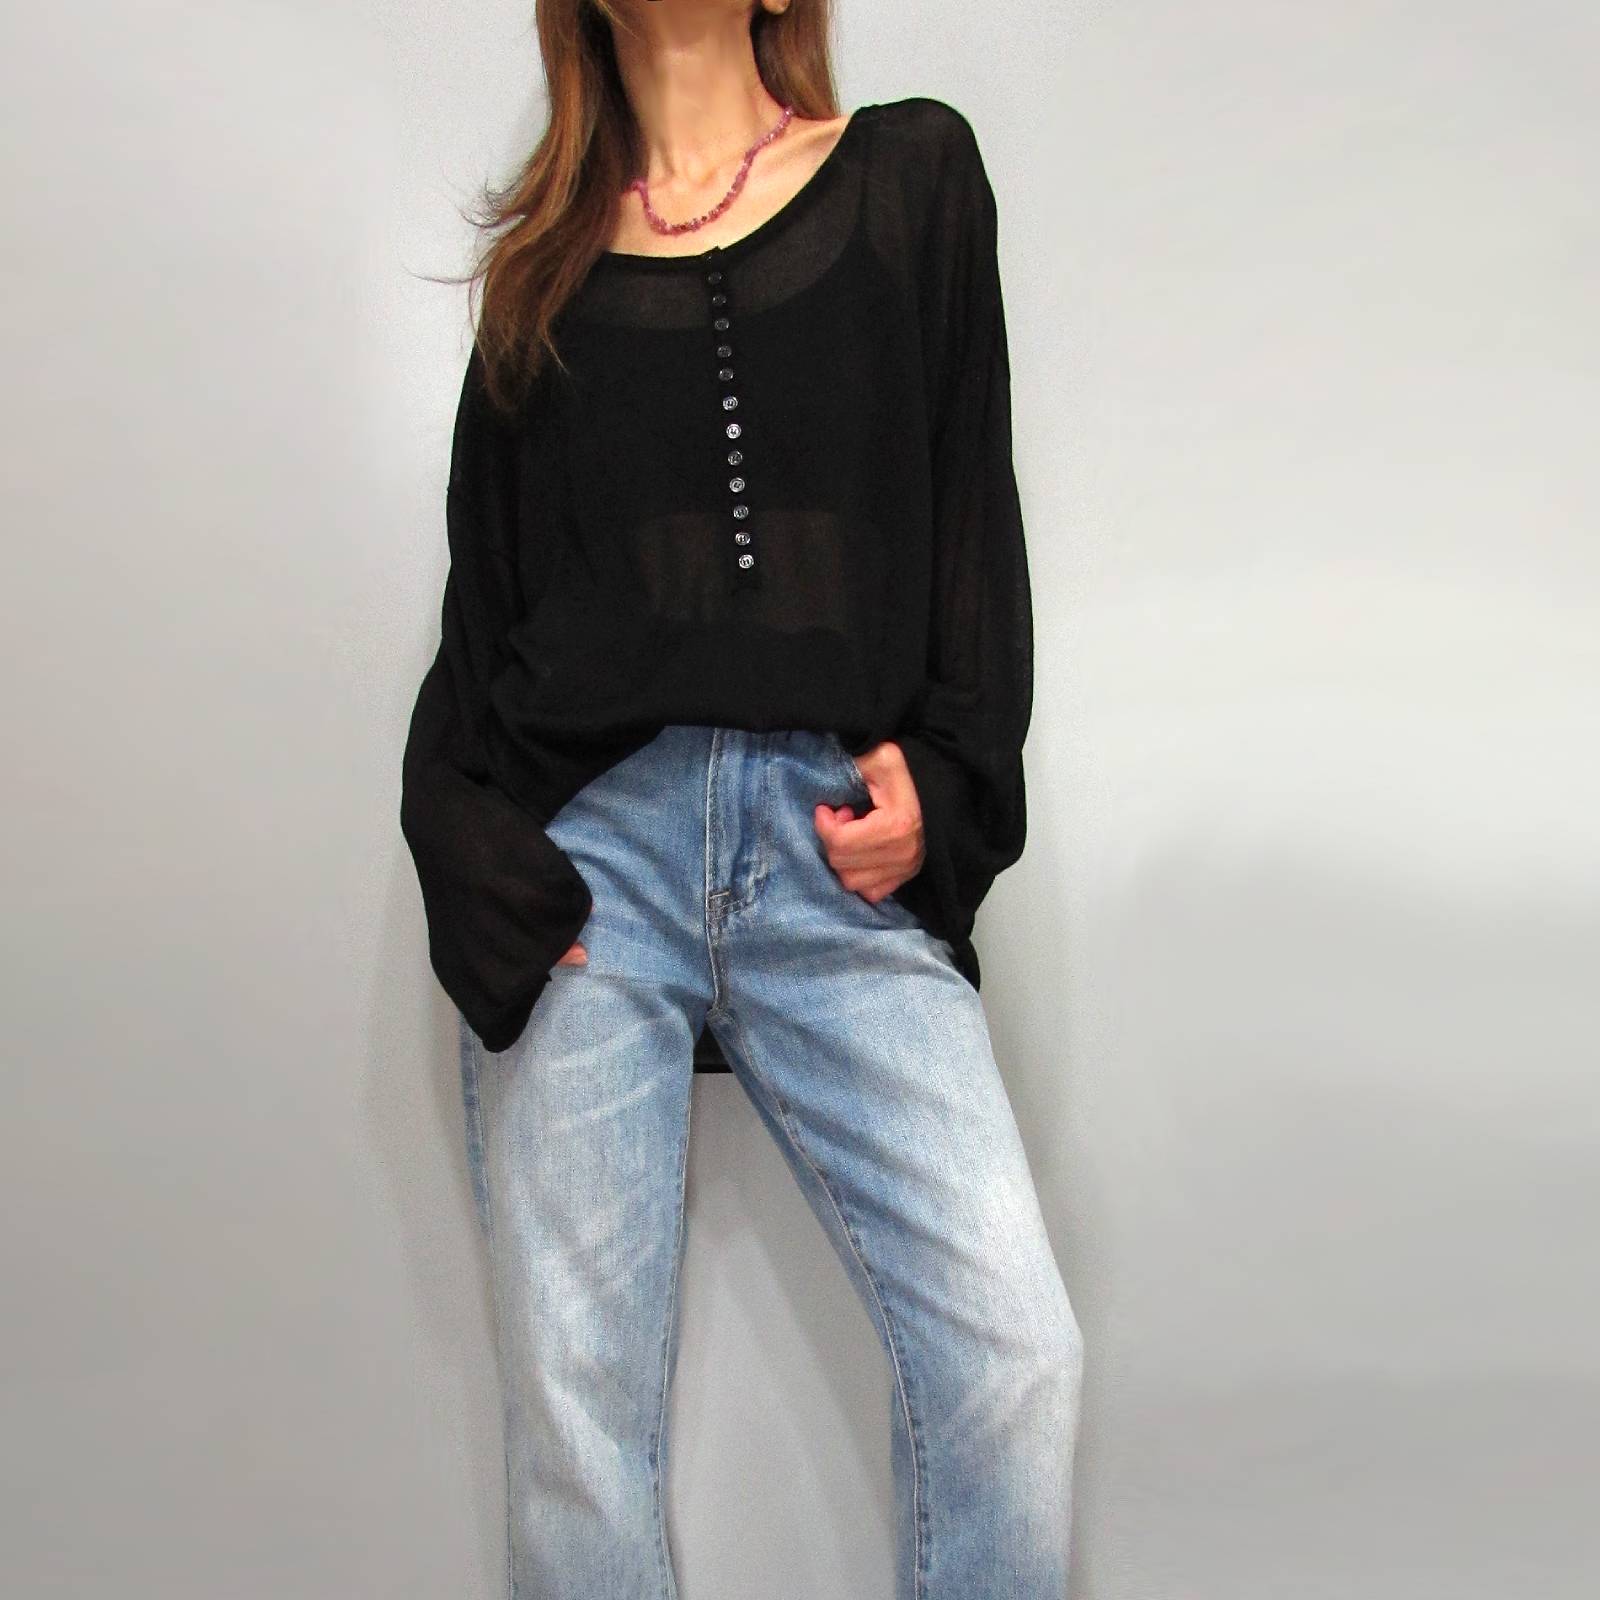 Tops845 Long Sleeve Knitted Henley Blouse/Black